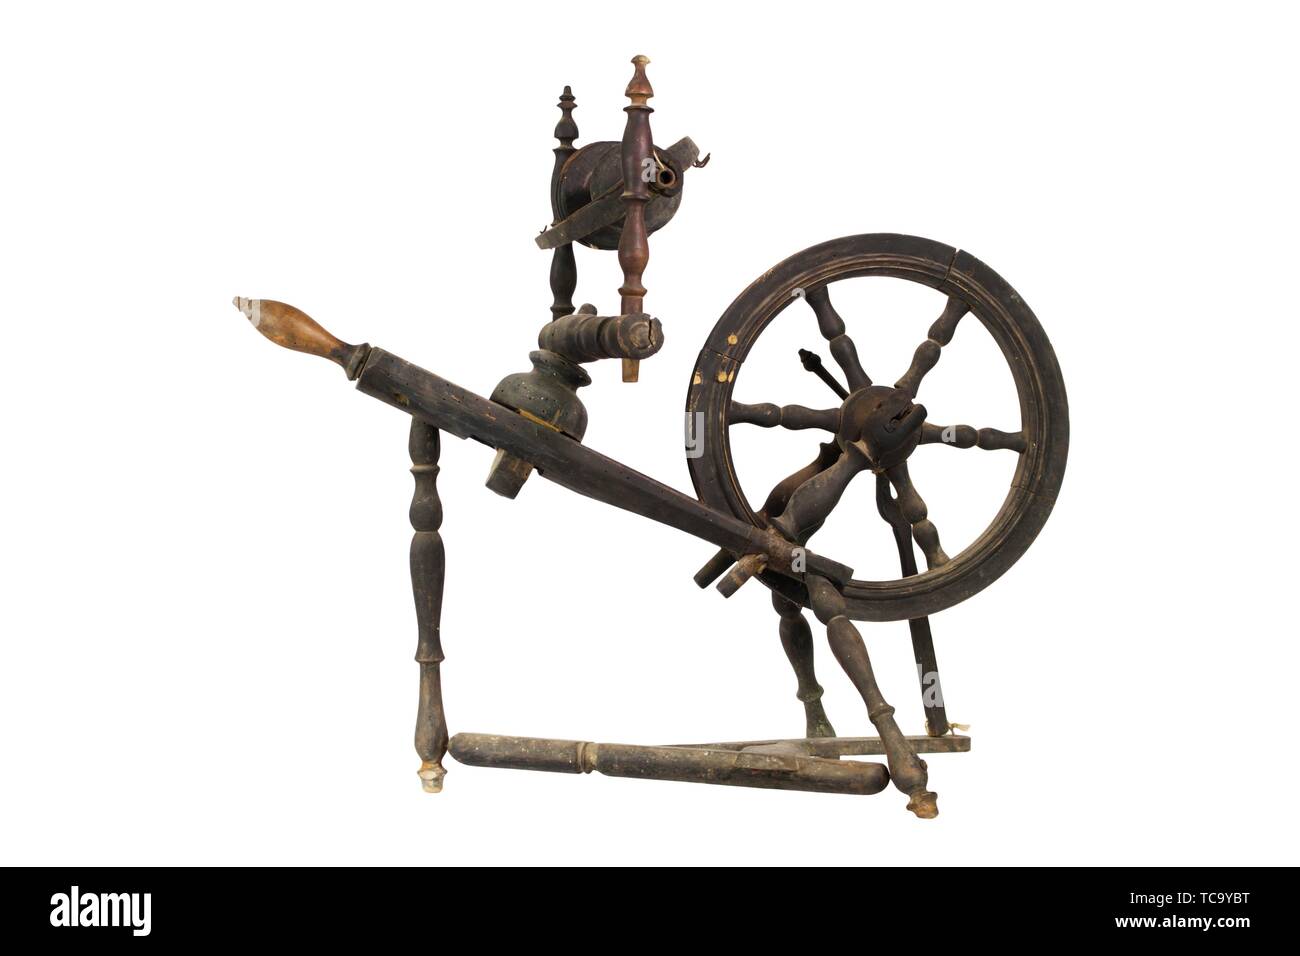 Spinning Wheel For Making Yarn From Wool Fibers. Vintage Rustic Equipment. Stock Photo